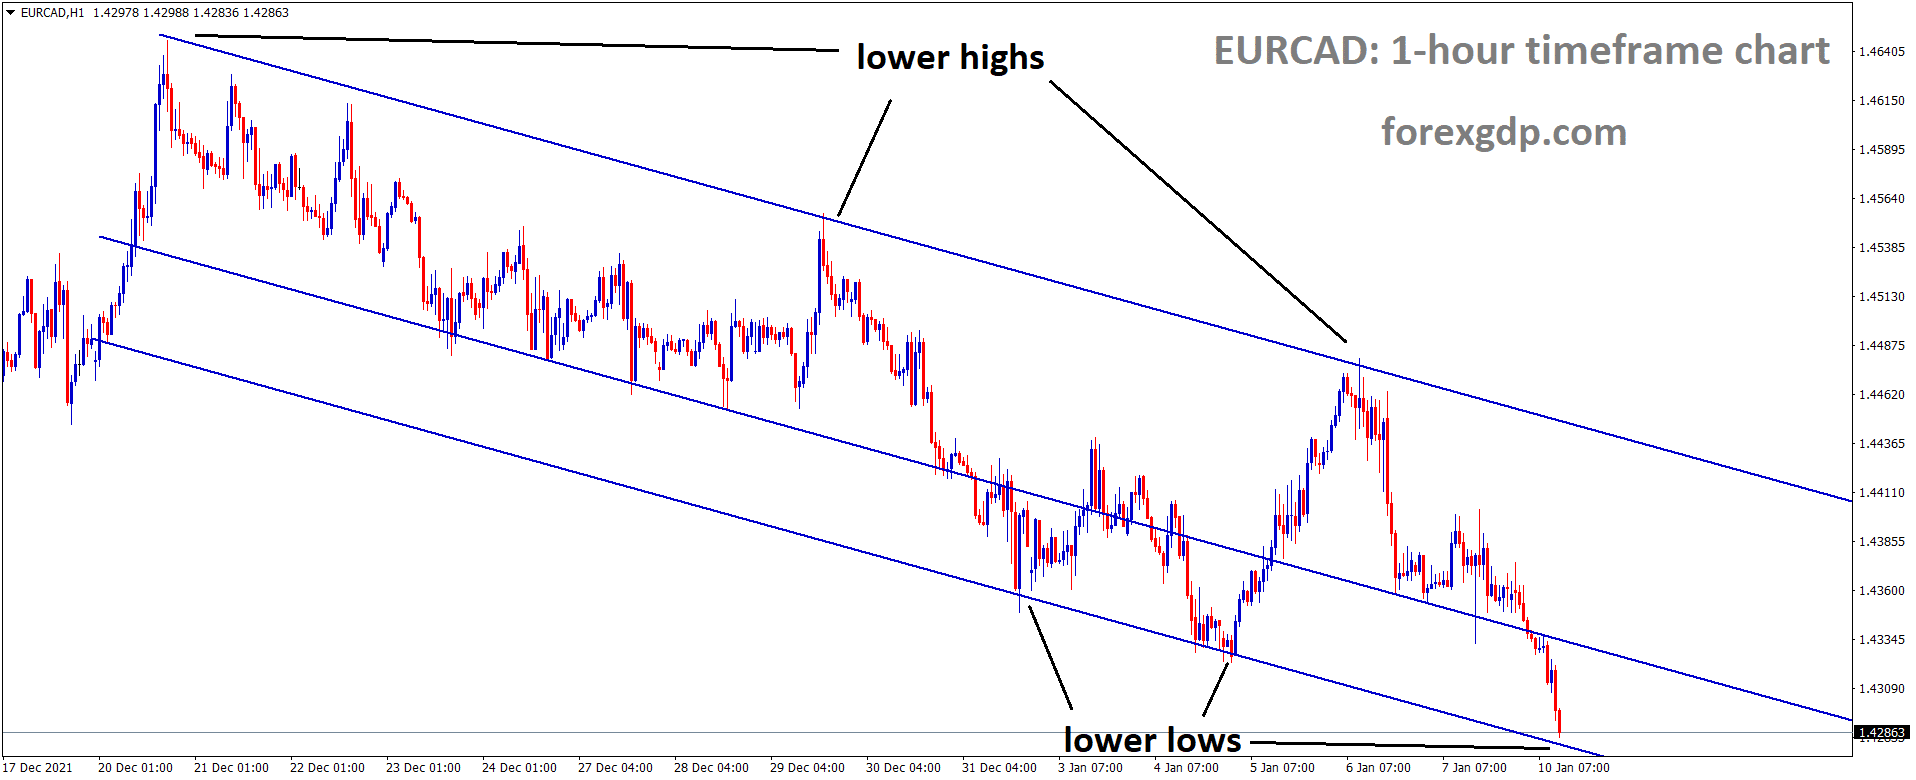 EURCAD is moving in the Descending channel and the market has reached the lower low area of the channel